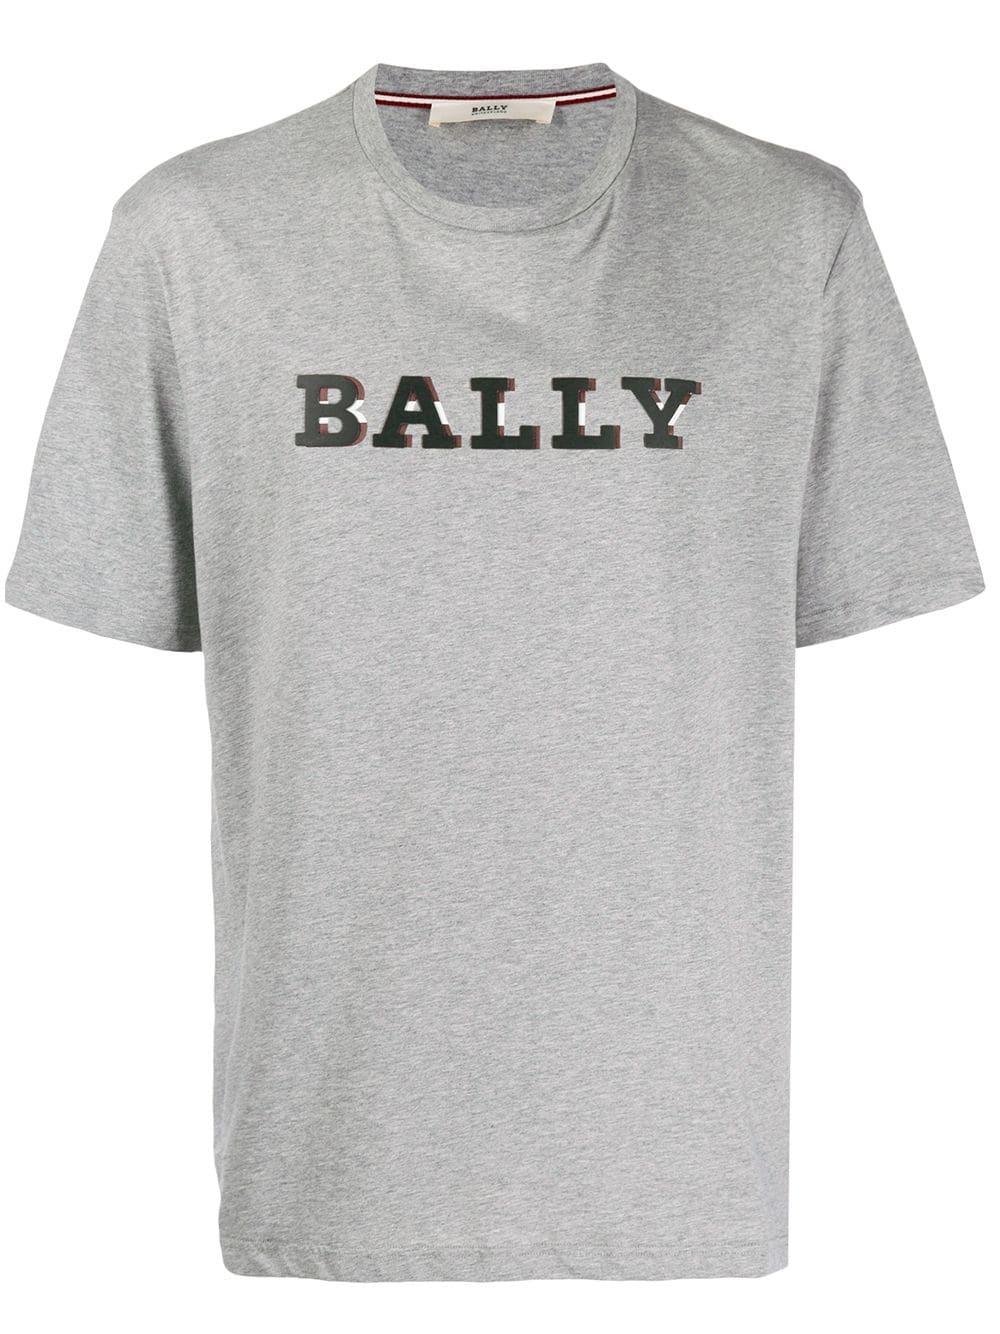 Bally Cotton Printed Logo T-shirt in Grey (Gray) for Men - Save 56% - Lyst